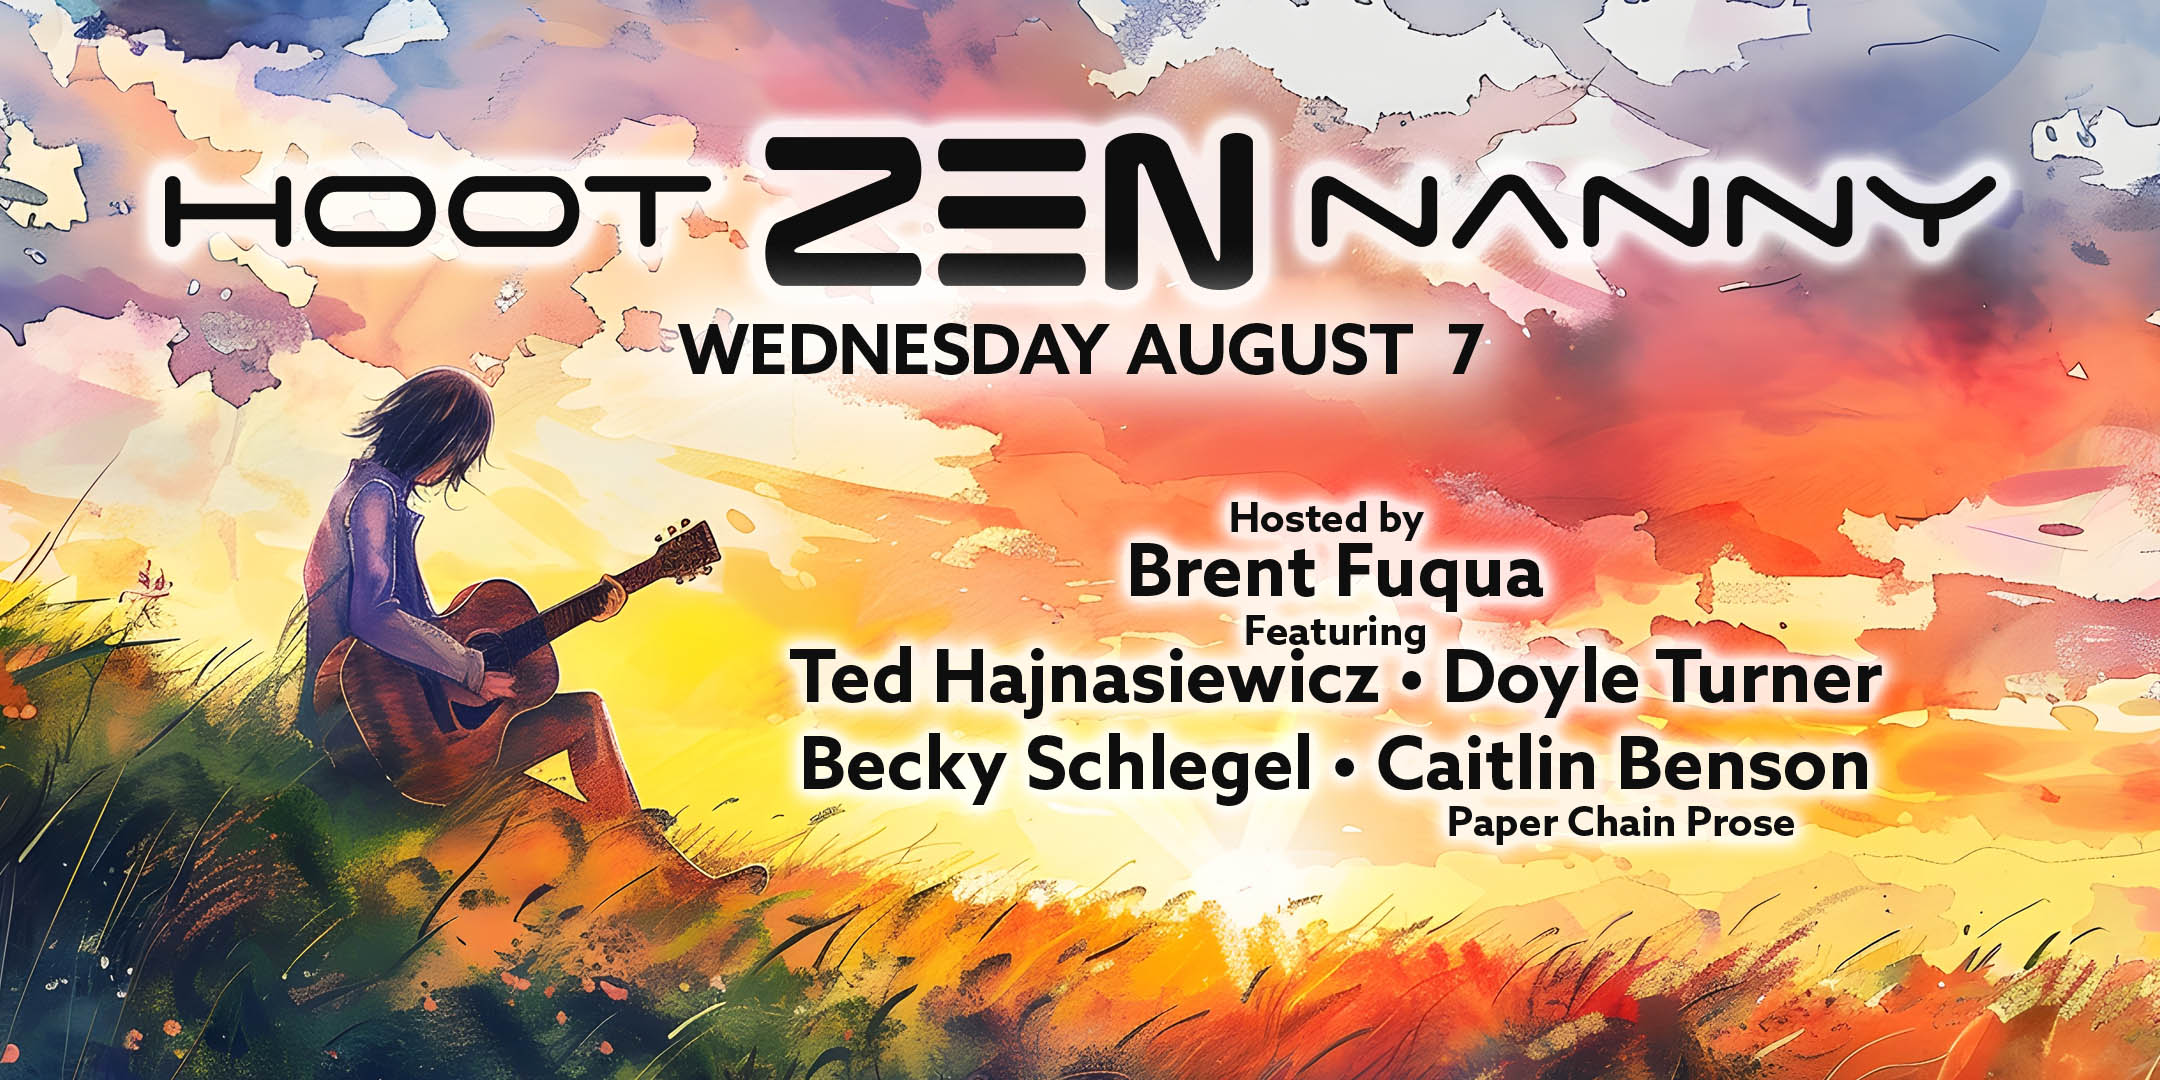 Hoot-Zen-Nanny (Every 1st Wednesday) Showcasing 4 artists in an intimate setting. Hosted by Brent Fuqua